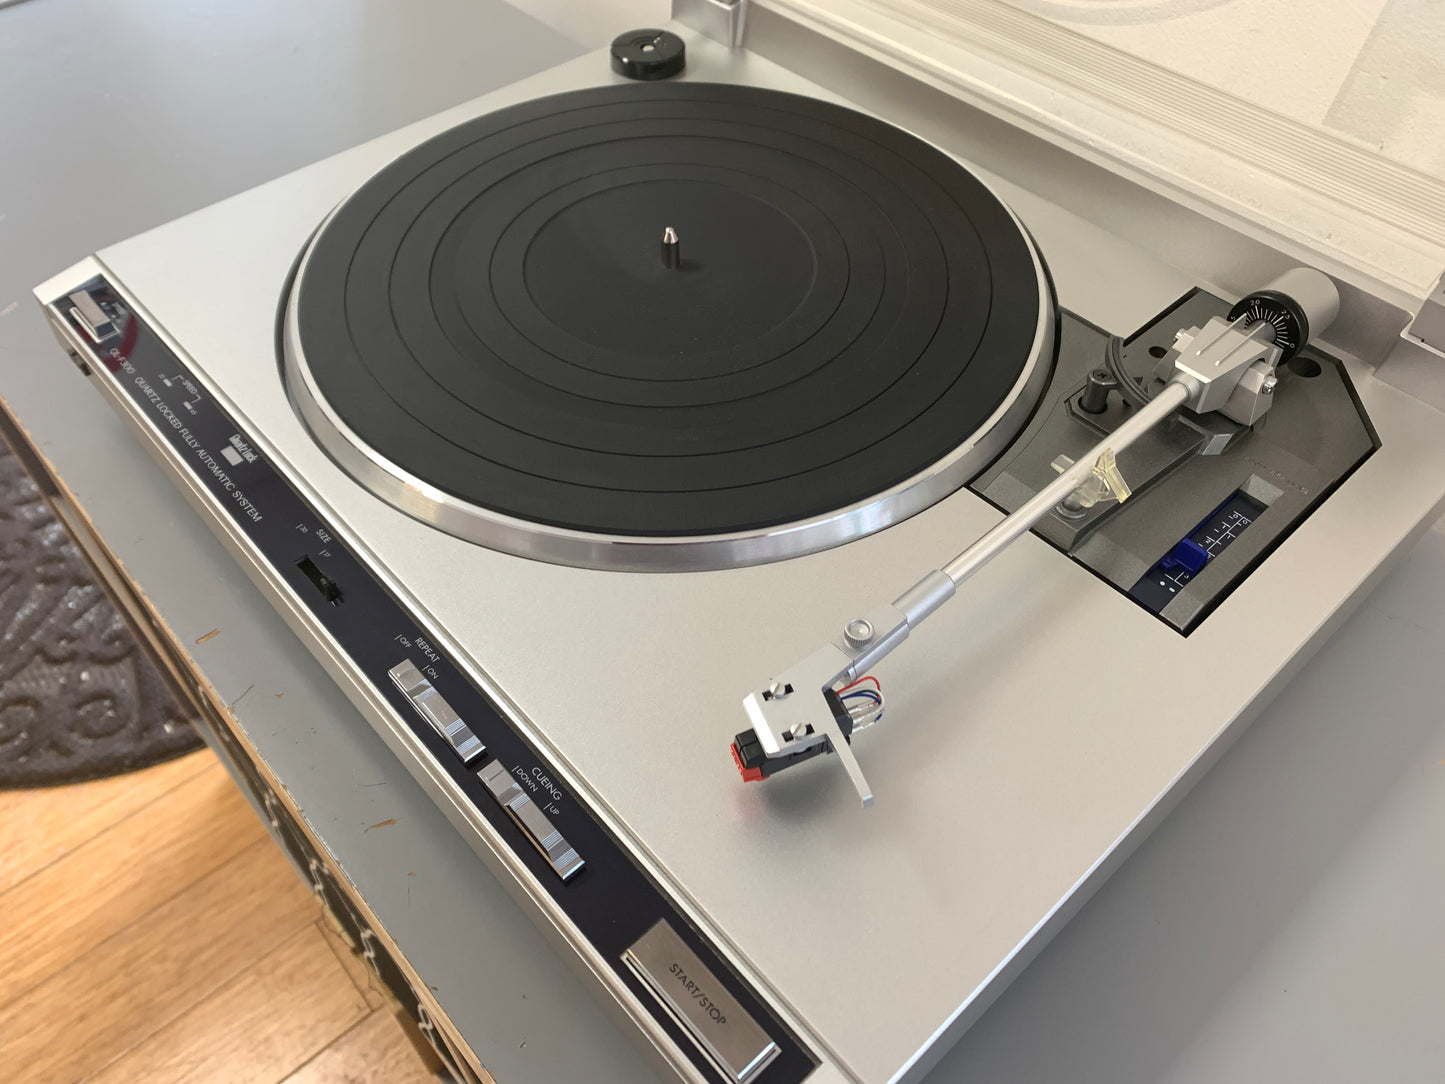 JVC QL-F300 Fully Automatic Turntable